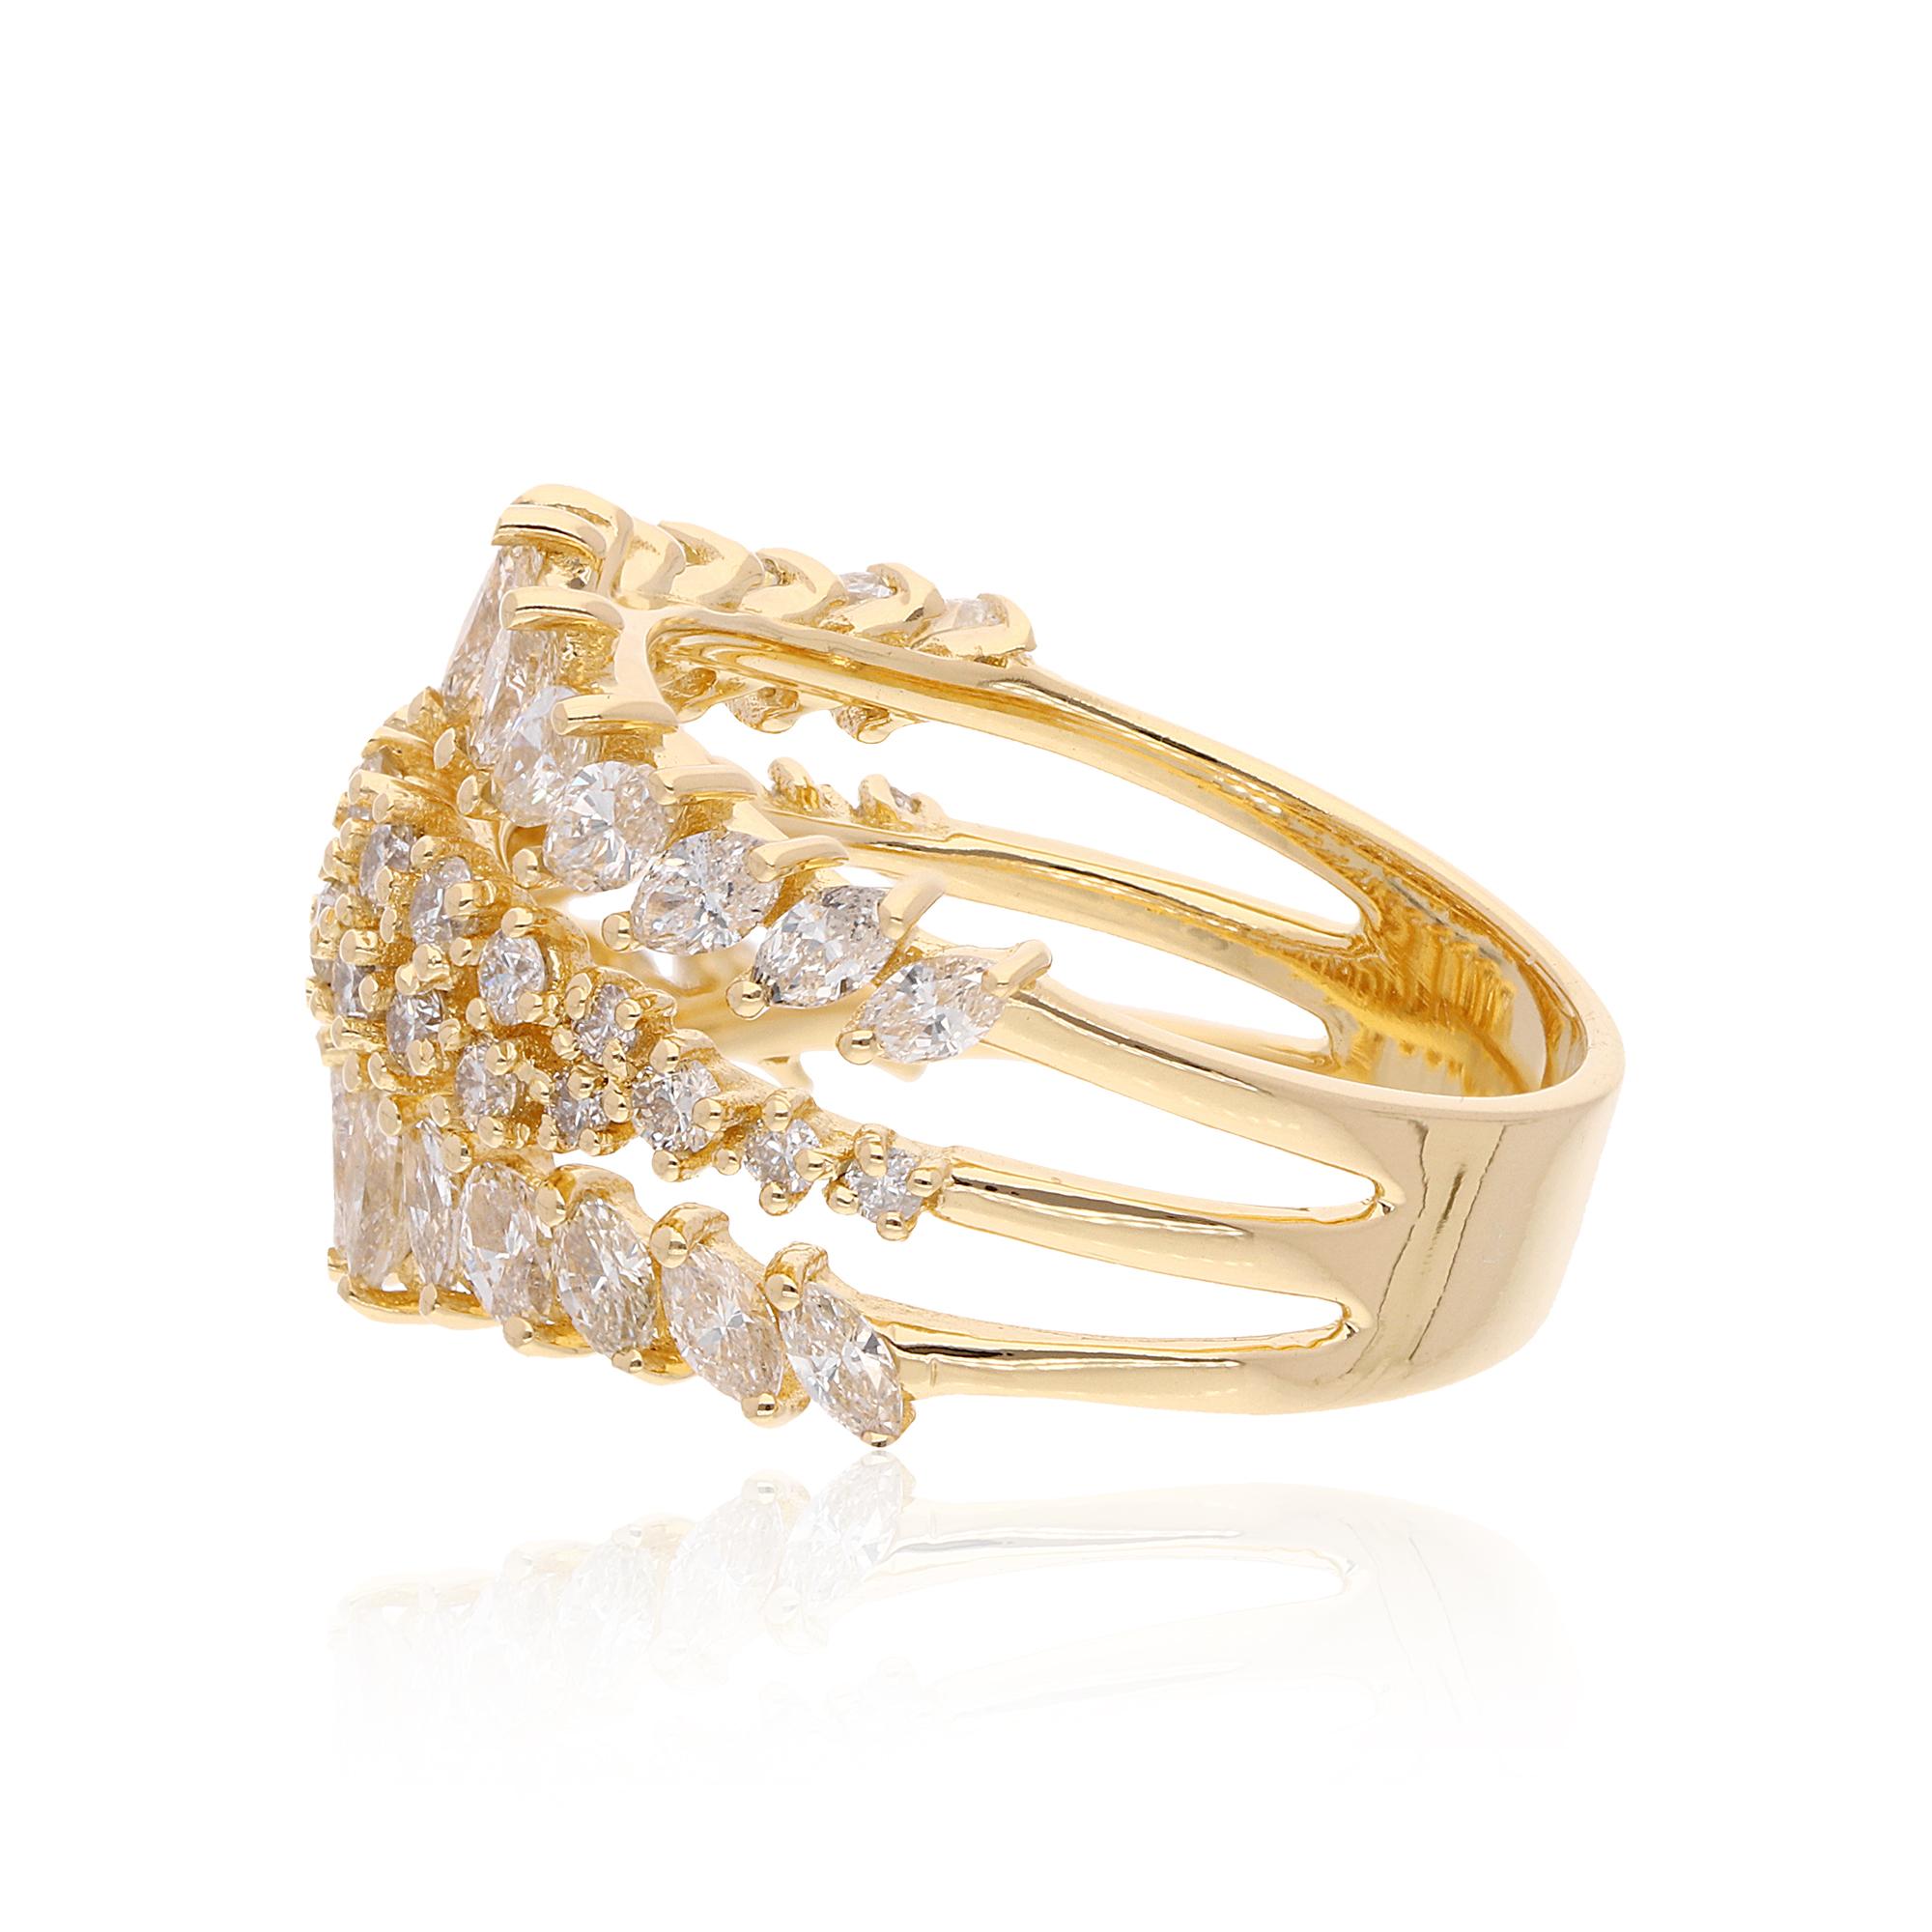 Item Code :- CN-16878
Gross Wt. :- 5.68 gm
14k Solid Yellow Gold Wt. :- 5.28 gm
Diamond Wt. :- 2.00 Ct. ( SI Clarity & HI Color )
Ring Size :- 7 US & All size available

✦ Sizing
.....................
We can adjust most items to fit your sizing